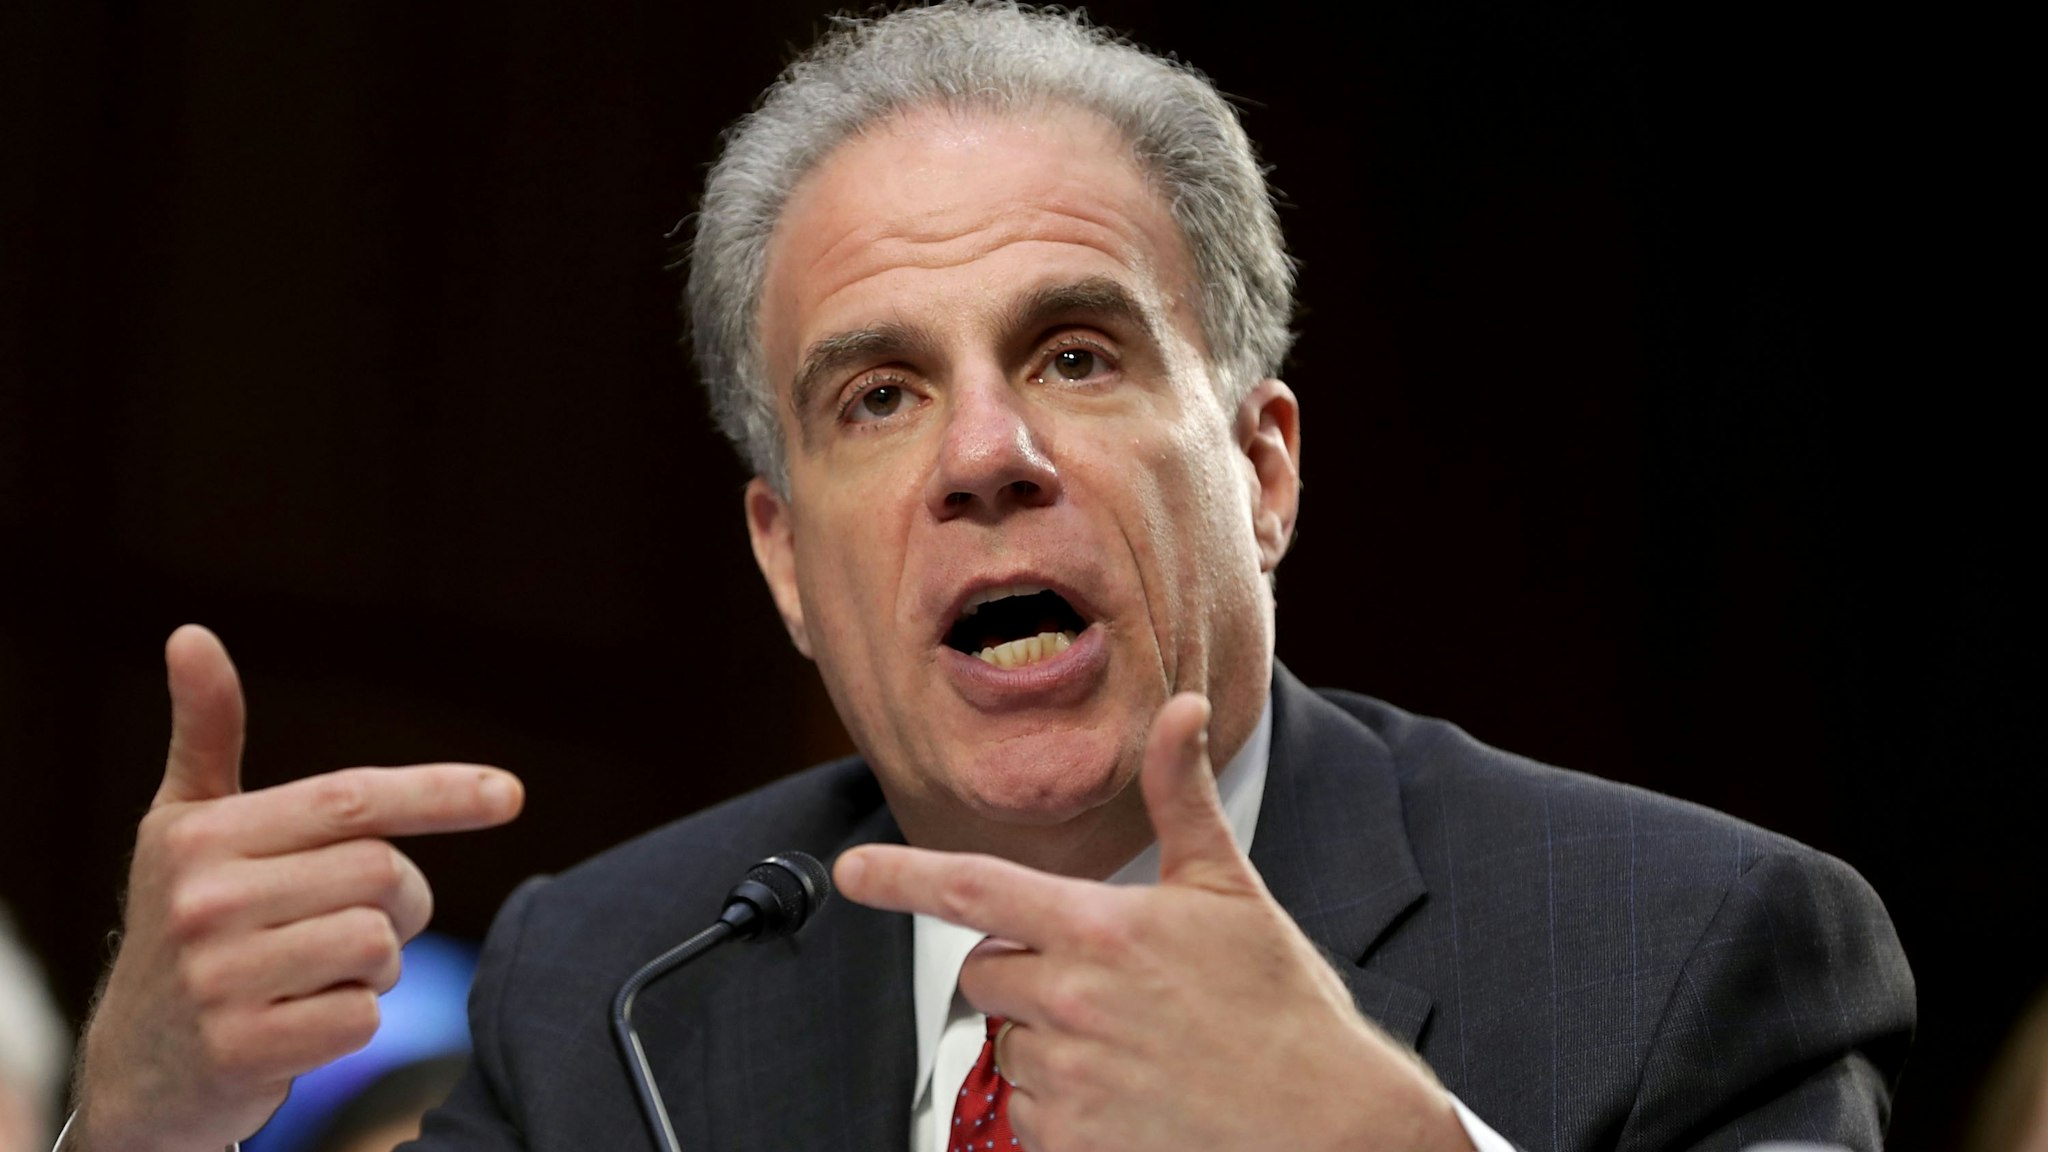 U.S. Justice Department Inspector General Michael Horowitz testifies before the Senate Judiciary Committee in the Hart Senate Office Building on Capitol Hill June 18, 2018 in Washington, DC. According to a report by Horowitz, former FBI Director James Comey and other top officials did not follow standard procedures in their handling of the 2016 investigation into Hillary ClintonÕs email server, but did not find any evidence of political bias.